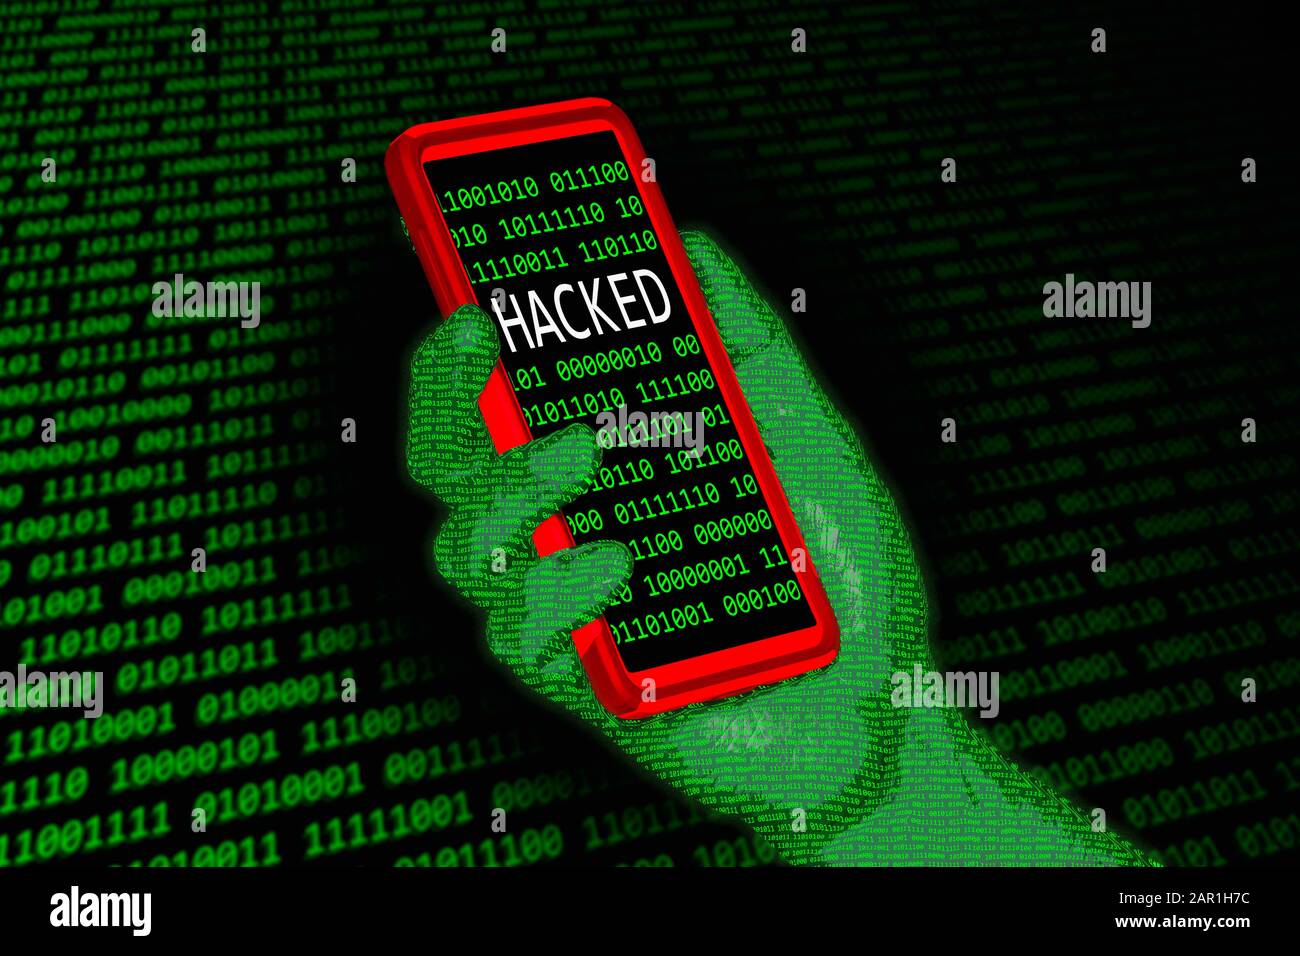 Illustration showing hacking concept. A hand covered in binary data using a smartphone to hack into a computer to steal or destroy data. Stock Photo